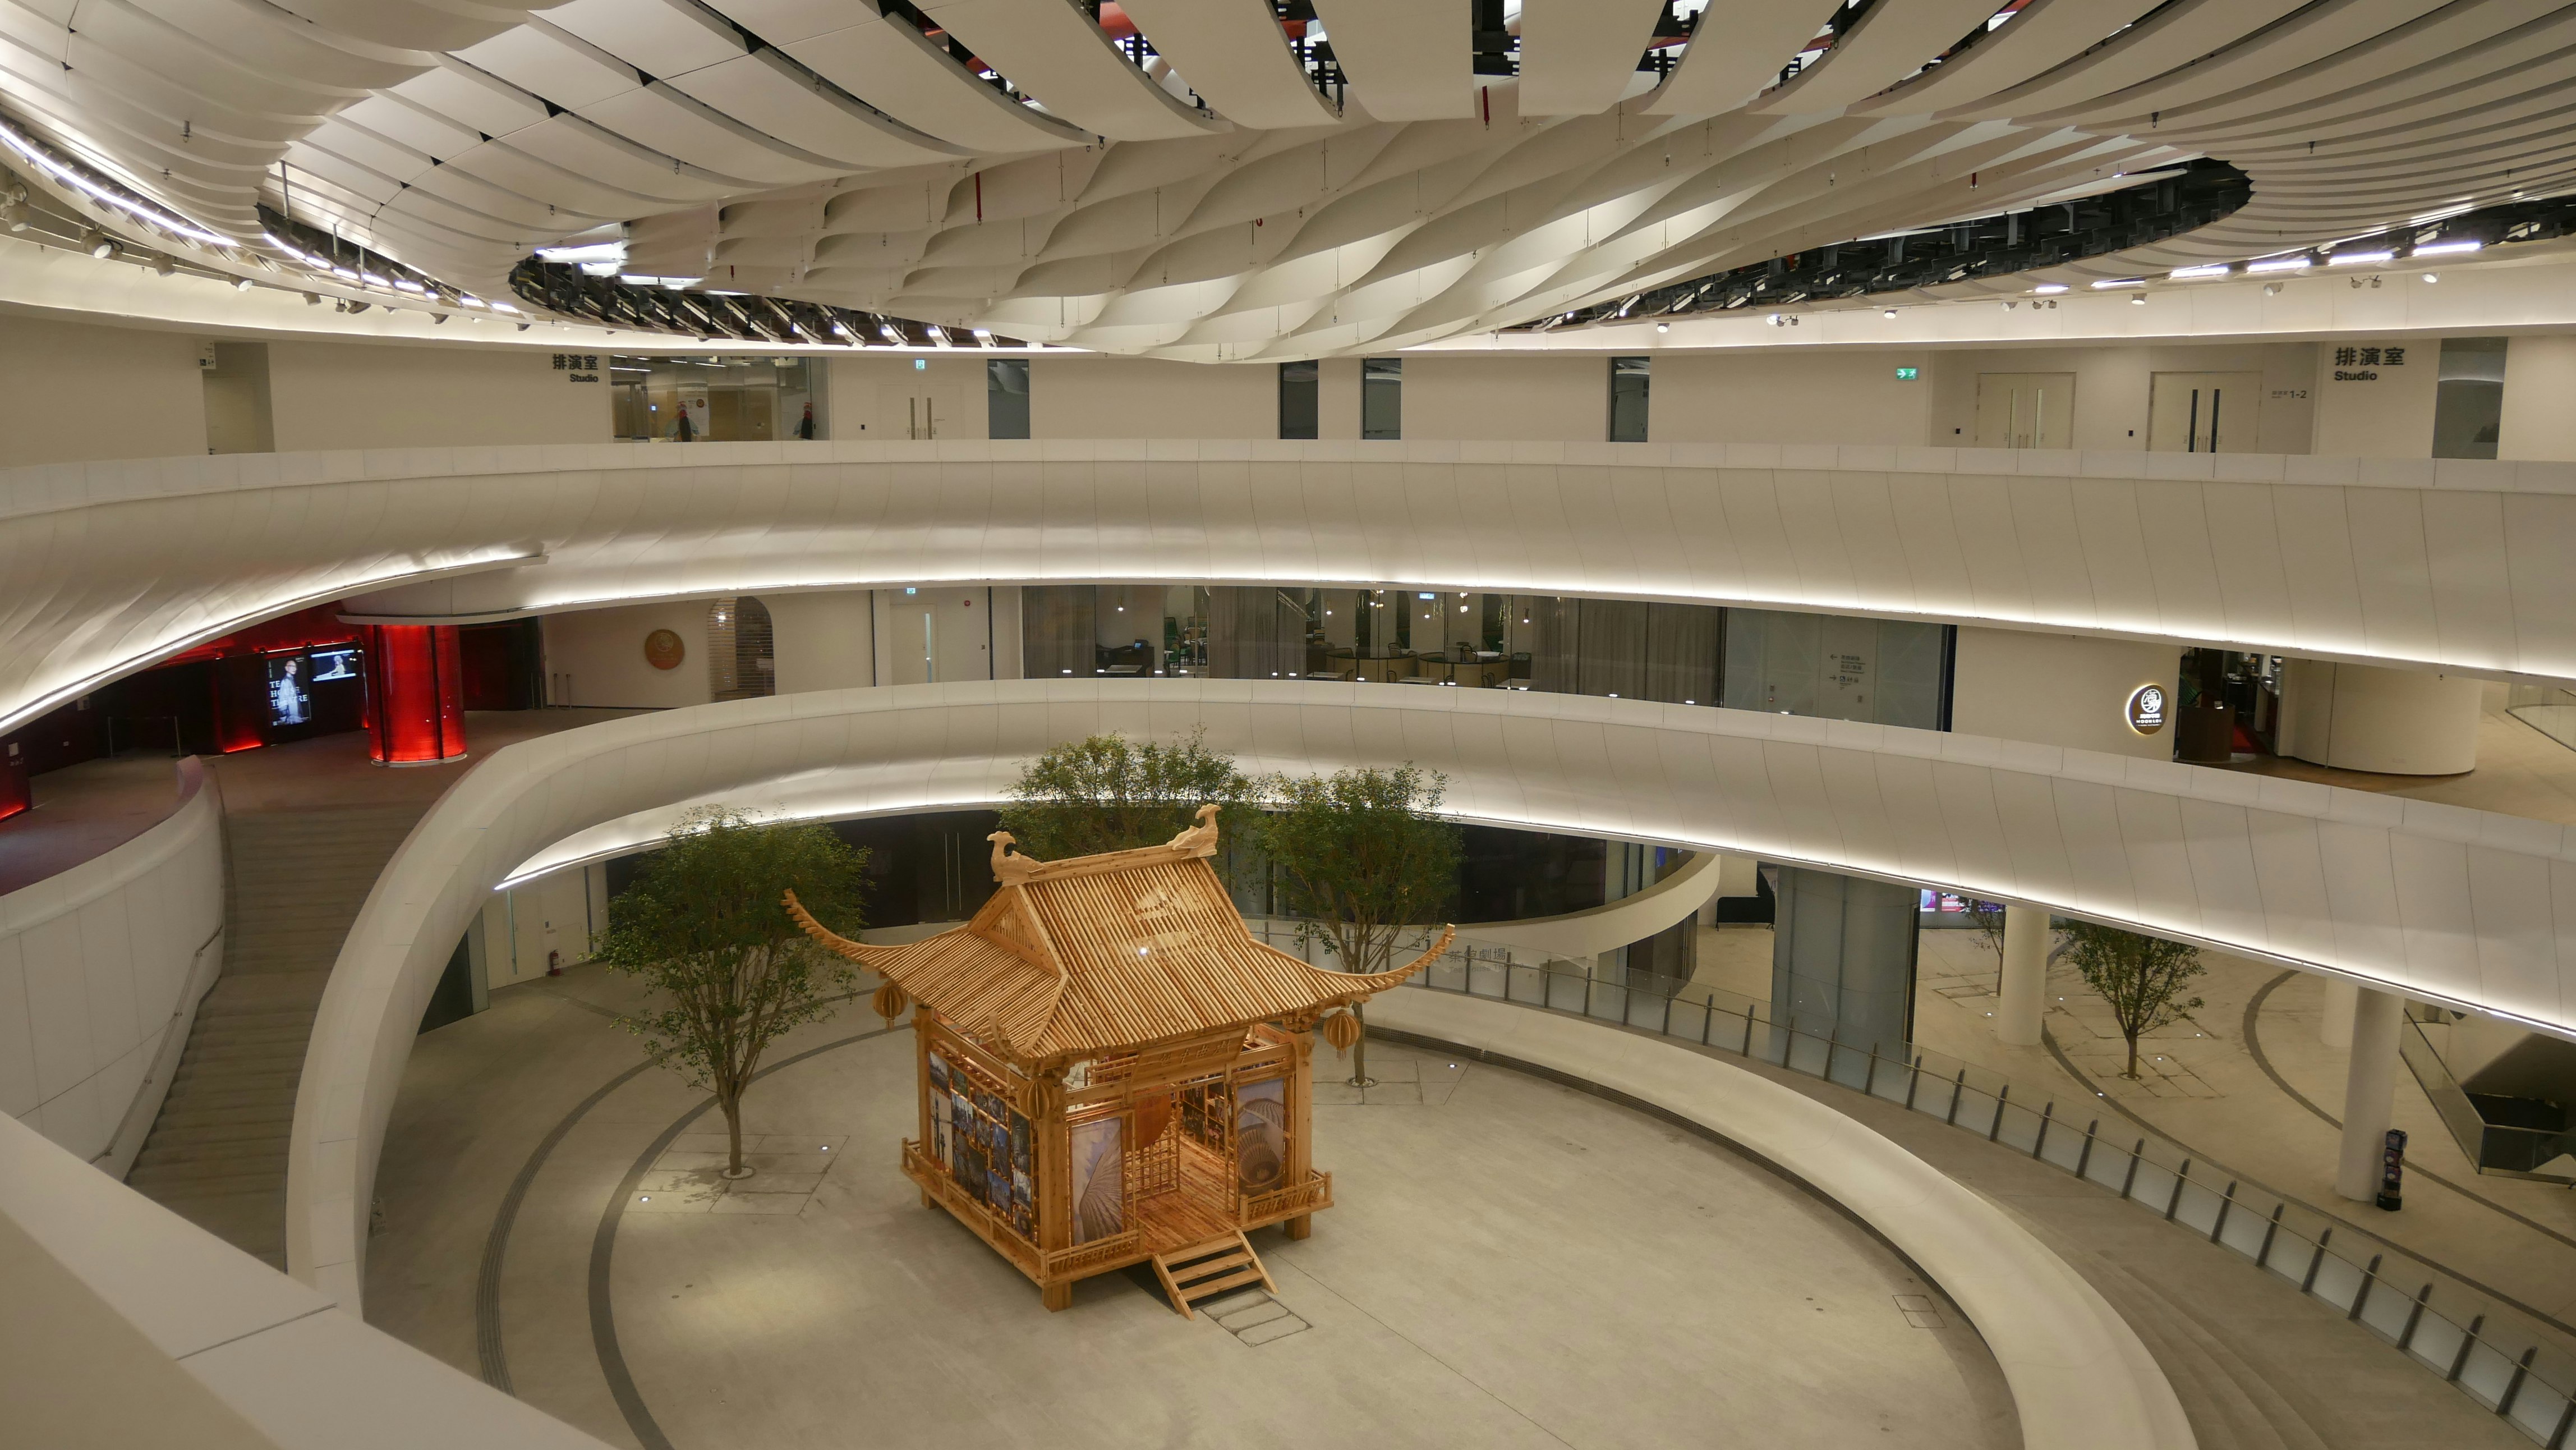 Xiqu Centre is Hong Kong’s new venue for Cantonese opera and other forms of Chinese traditional theatre.